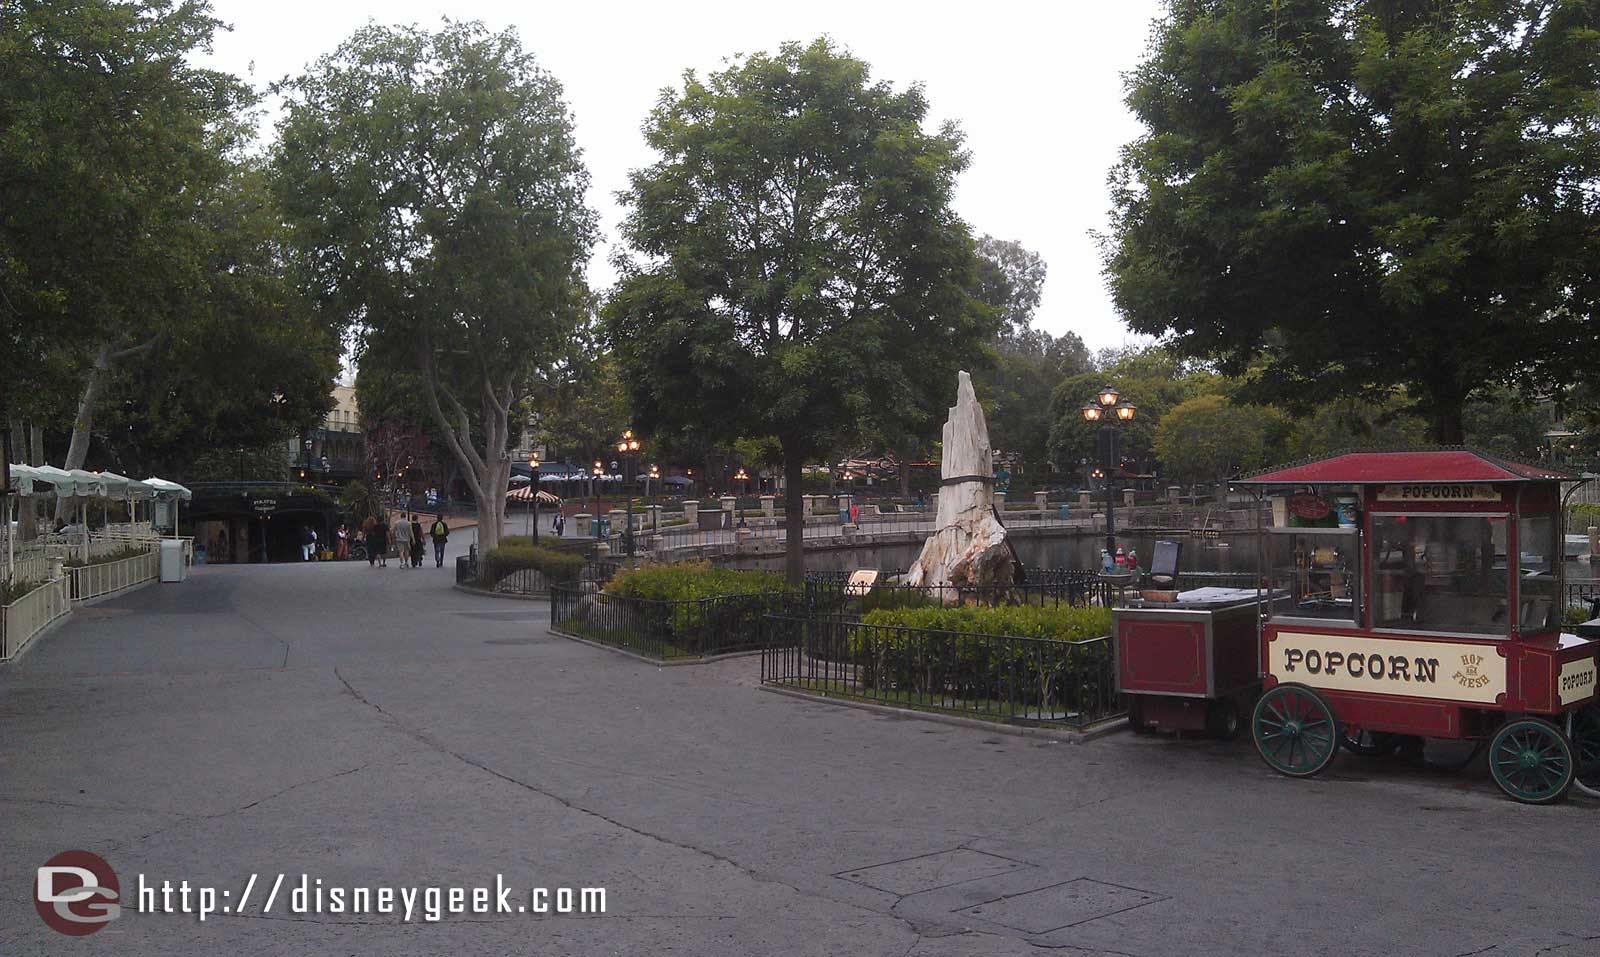 Disneyland is nice and quiet this morning